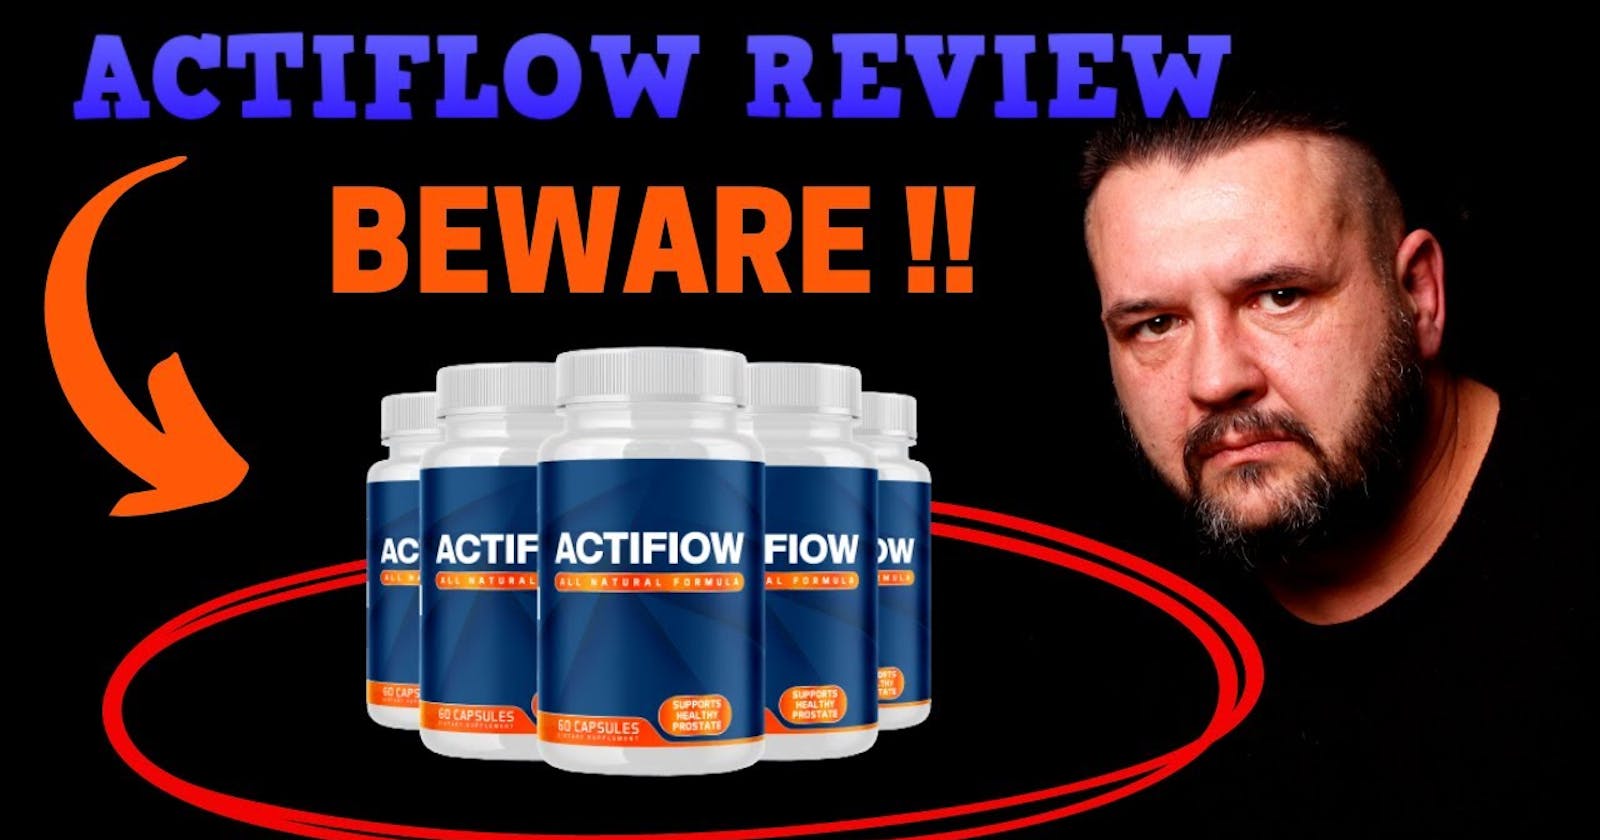 Actiflow - Prostate Health Results, Price, Complaints & Warnings?